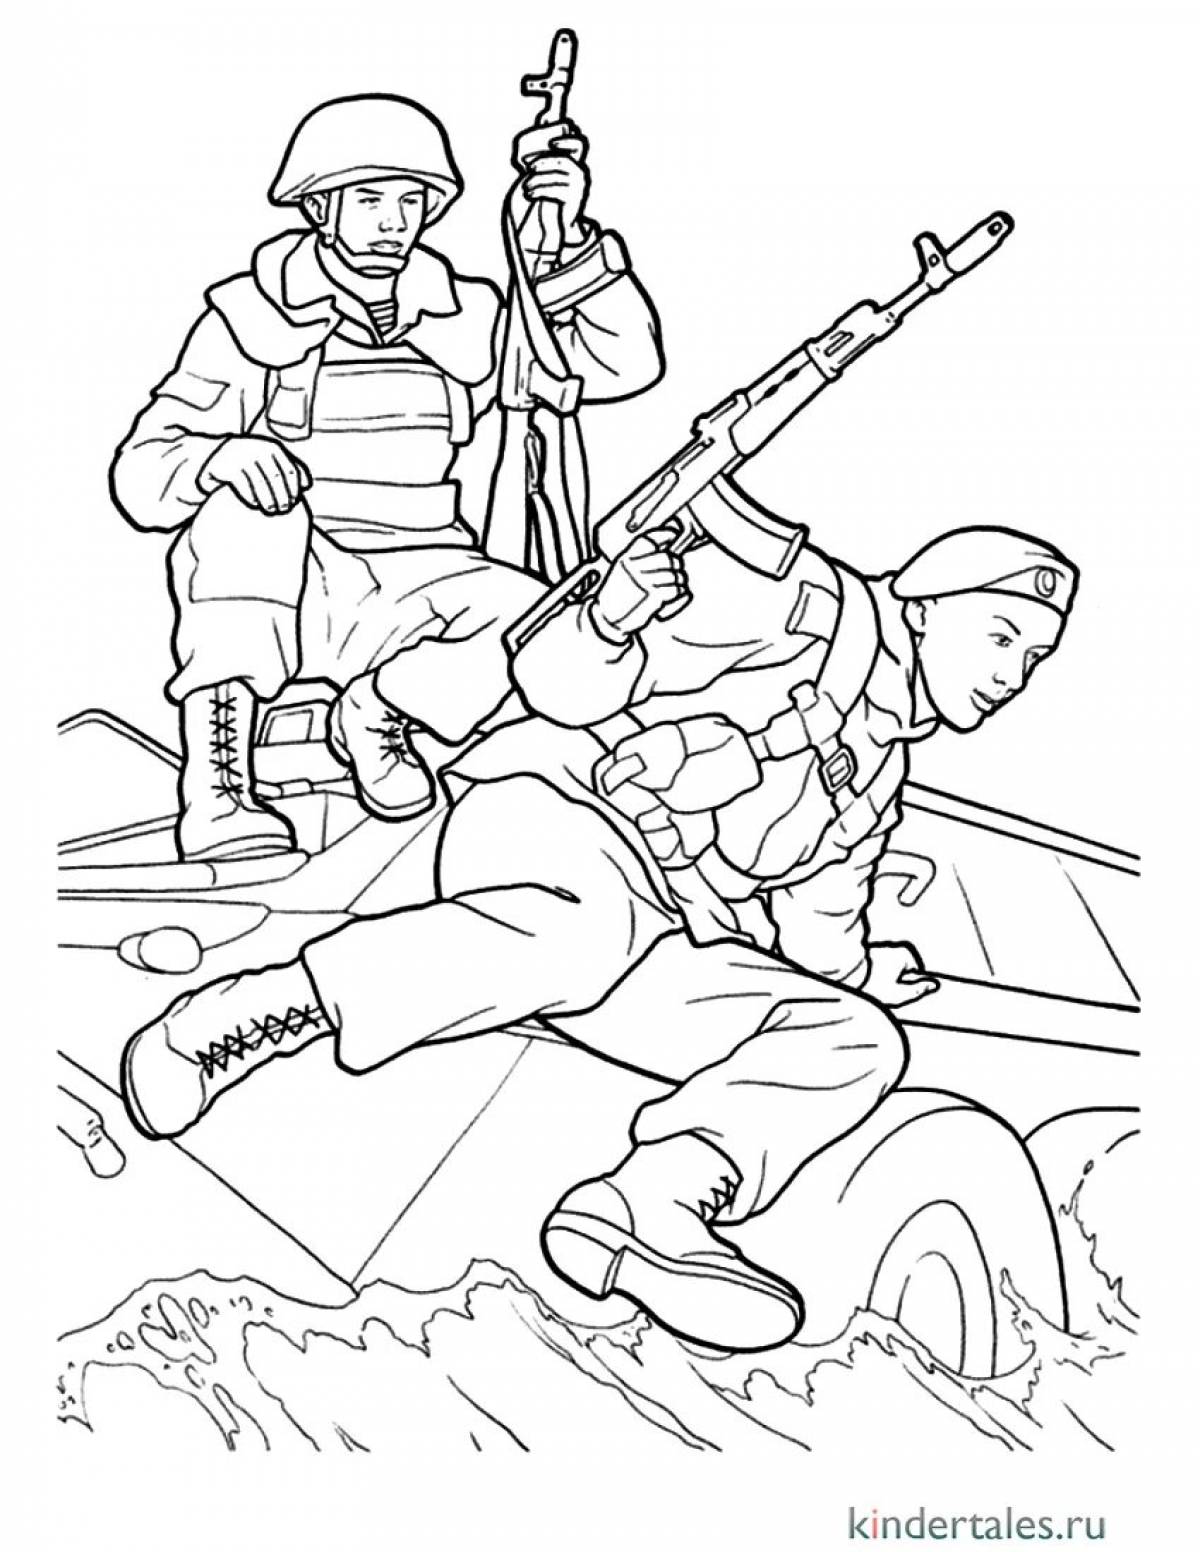 Russian army for kids #9